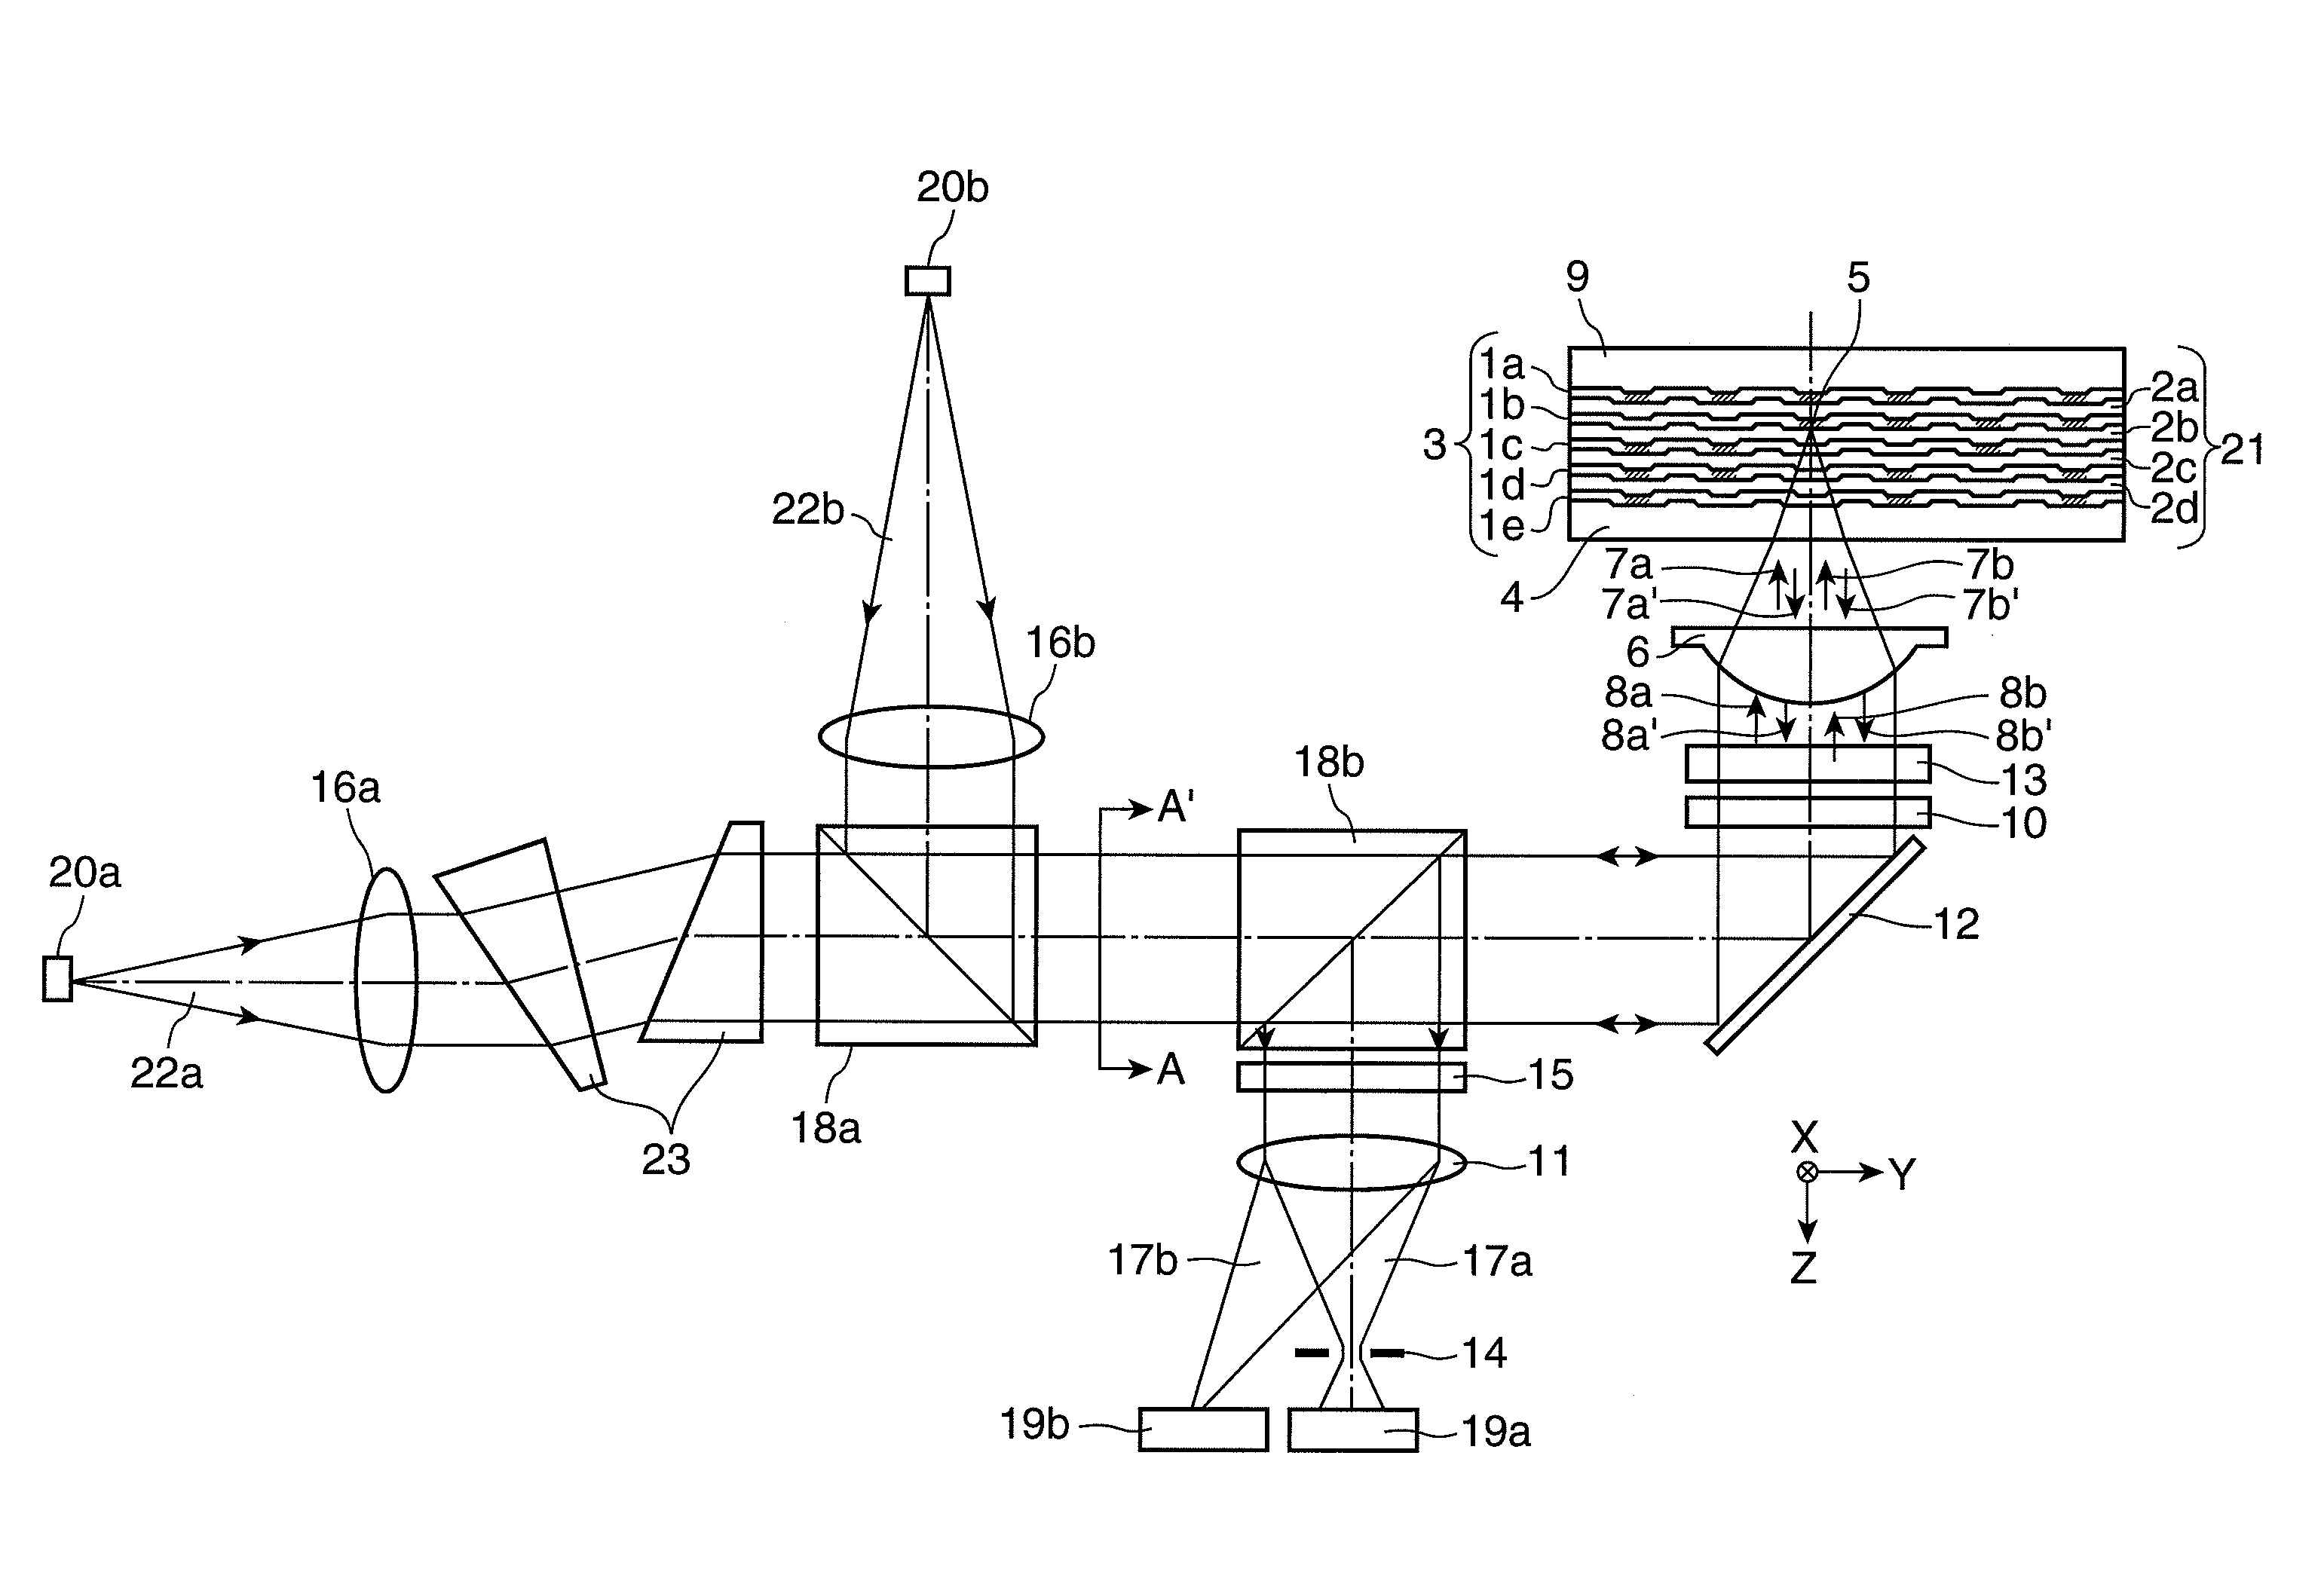 Optical information recording/reproducing device